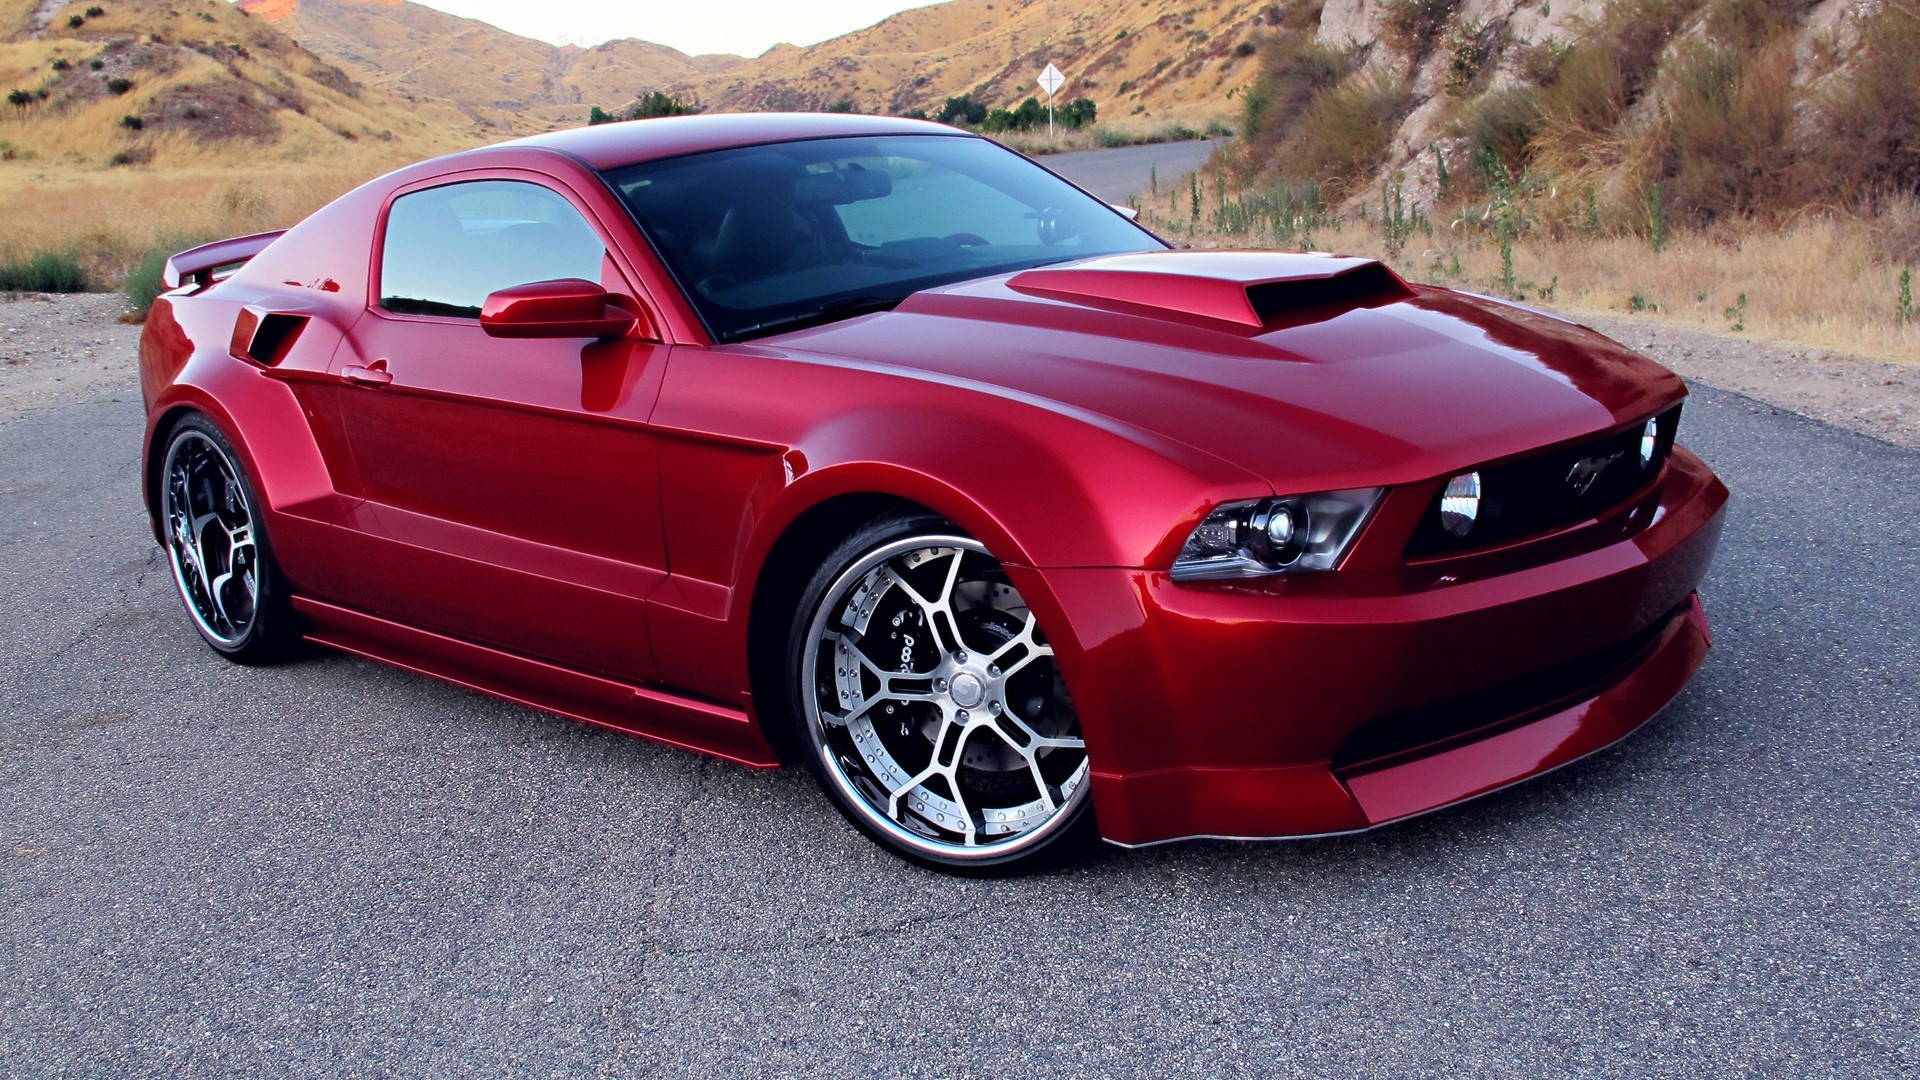 General 1920x1080 Ford Mustang red cars car vehicle Ford Ford Mustang S-197 II muscle cars American cars